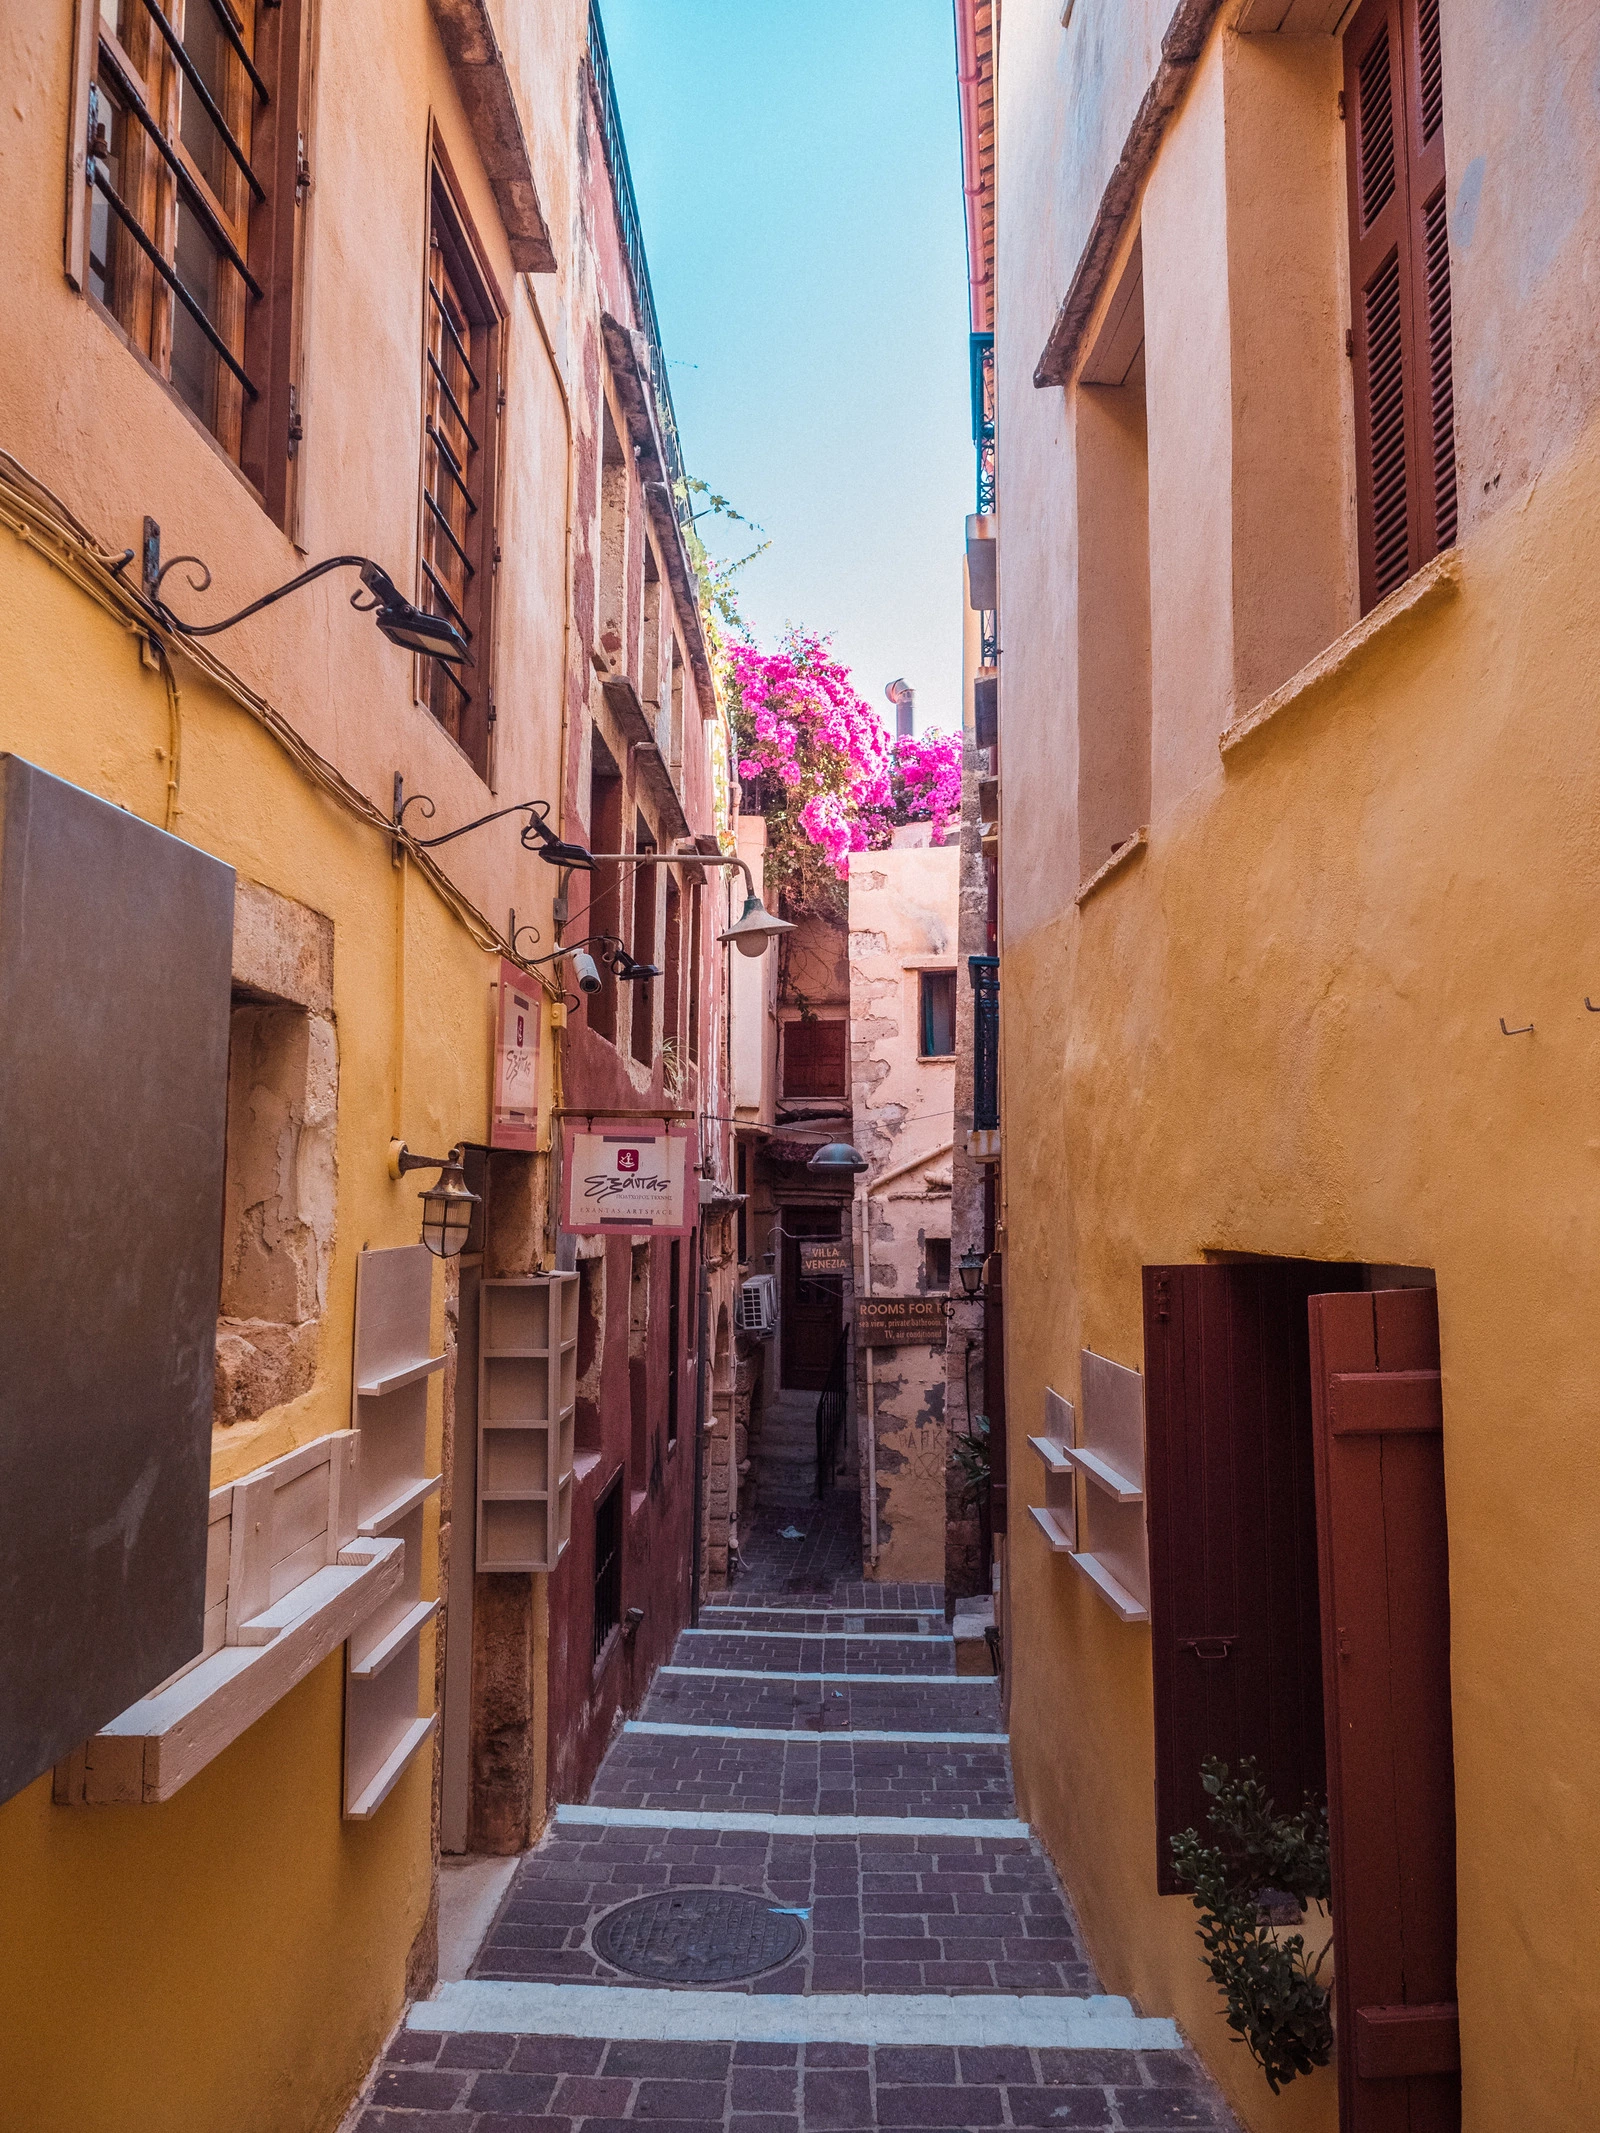 Narrow alley between yellow buildings and pink Bougainvillea flowers, one of the top things to do in Chania after the beach.